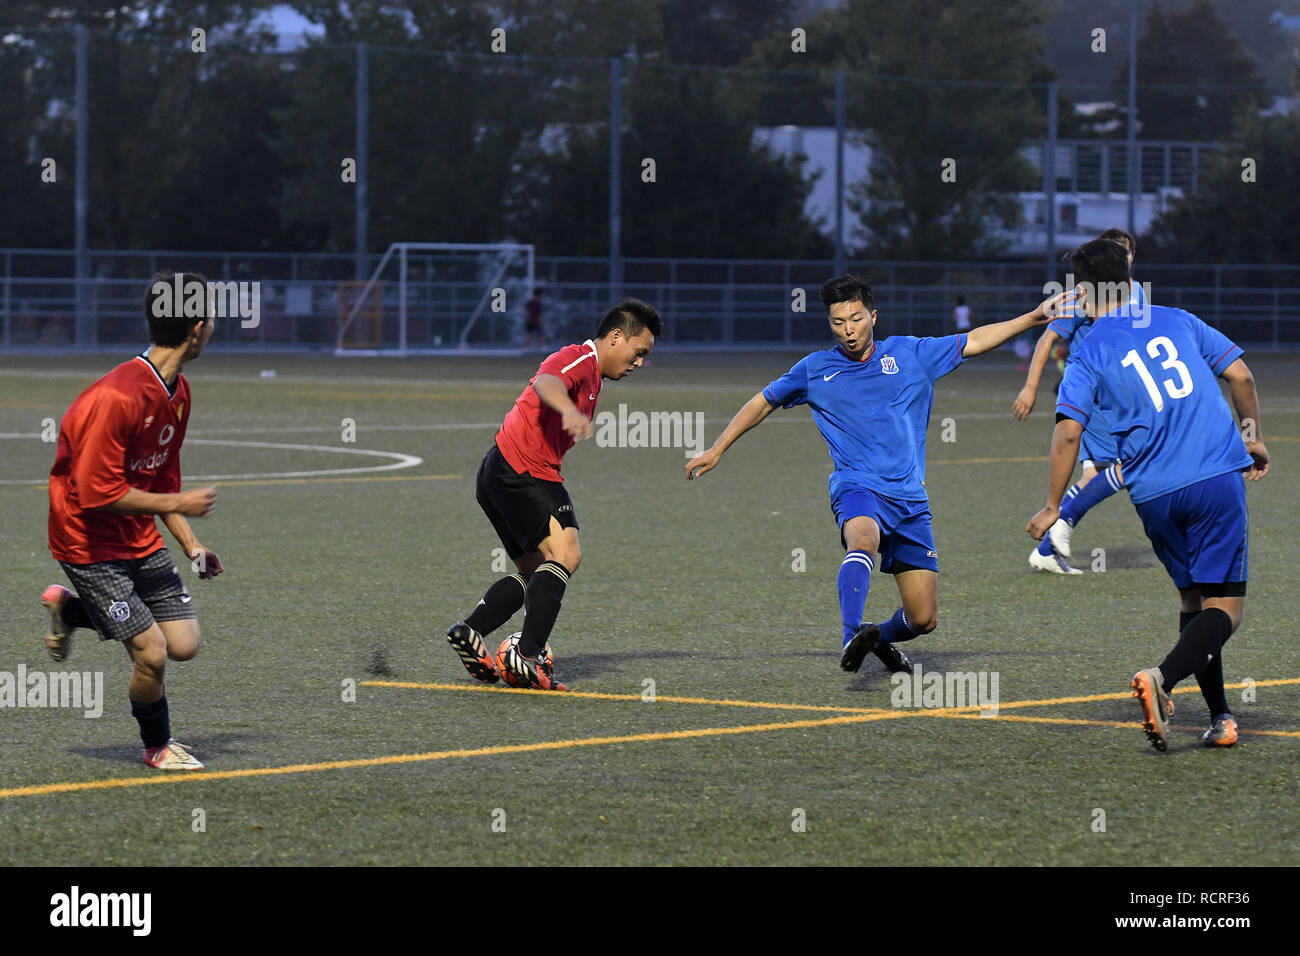 2 Chinese Teams having a friendly match in the evening Stock Photo